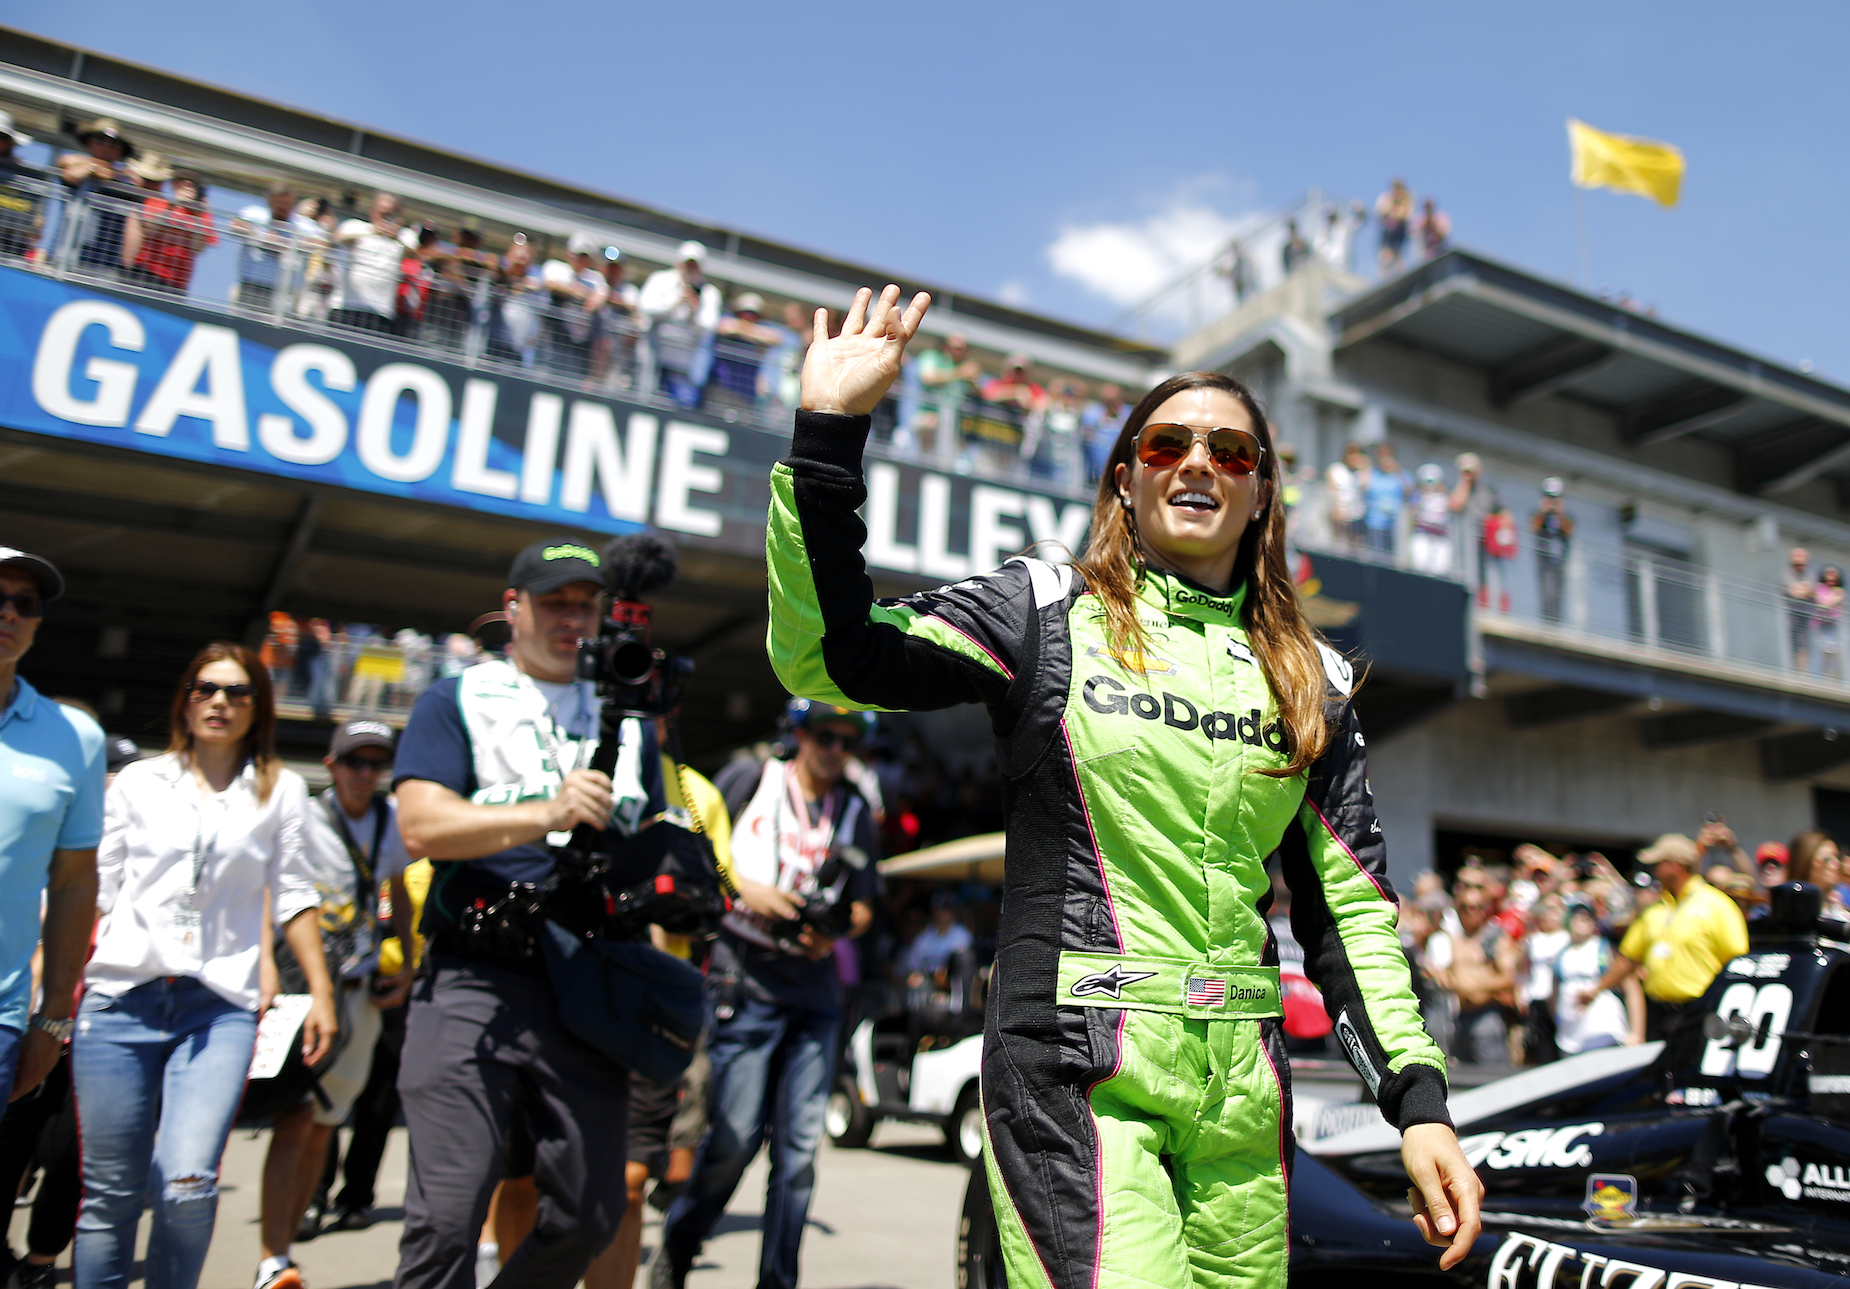 Danica Patrick's historic racing career could have ended in tragedy before it even begun.